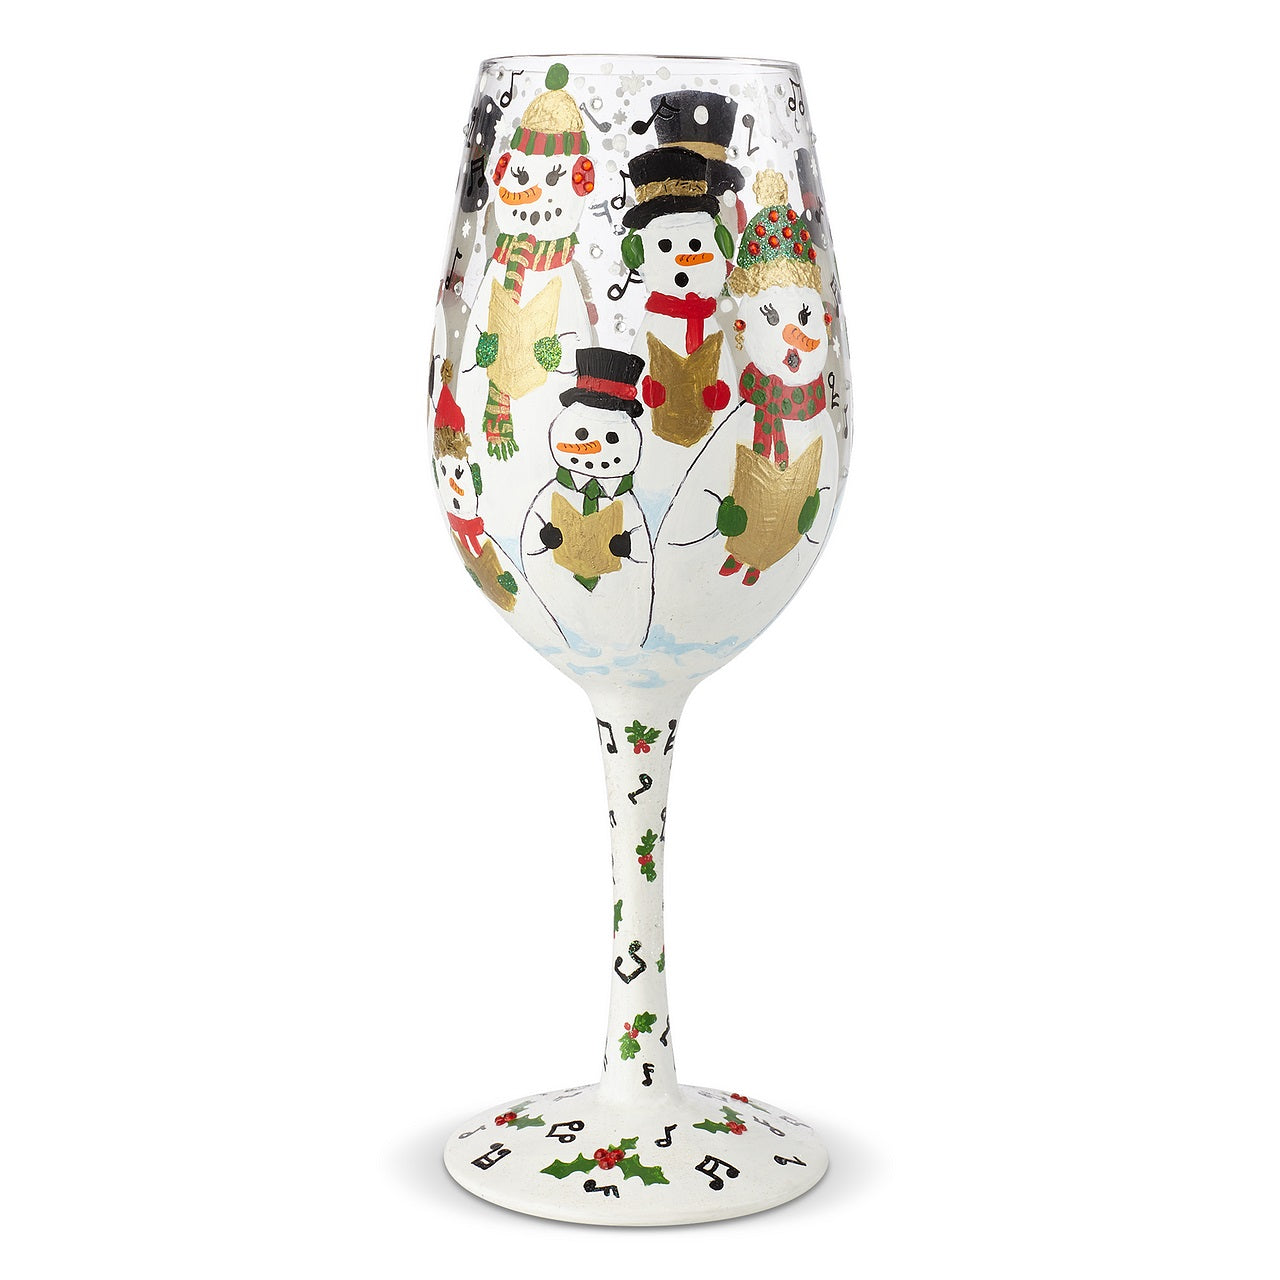 Lolita Singing in the Snow Wine Glass  Lolita glasses combine hand painted accents with sassy messages that help you celebrate any occasion in style. Arrives in a beautiful gift box with Lolita's signature painted under the base of the glass.